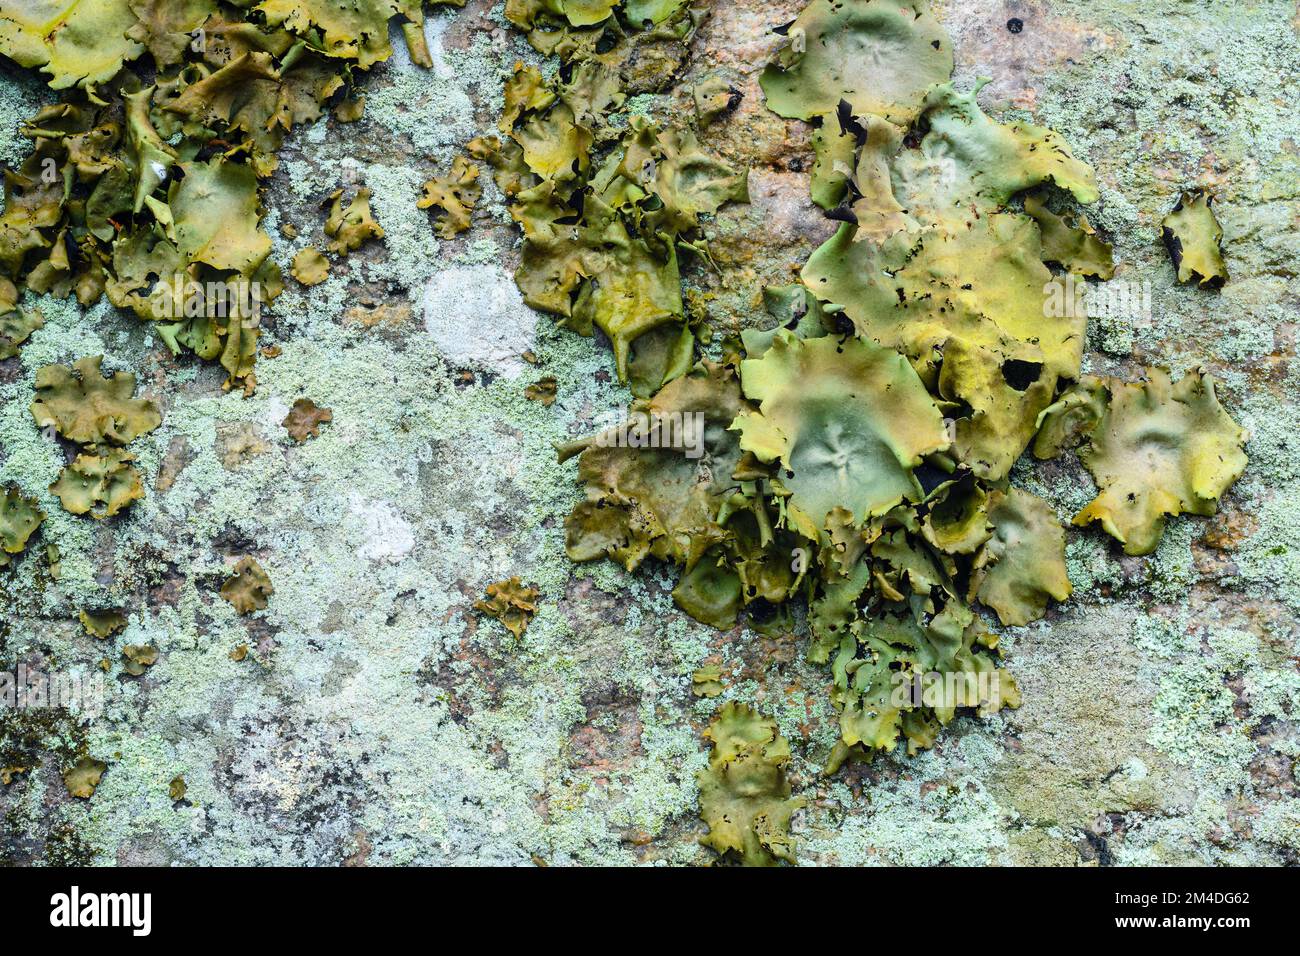 Rock tripe, lichen of the genus Umbilicaria. Colony growing  on woodland rock face, Parry Sound, Ontario, Canada Stock Photo